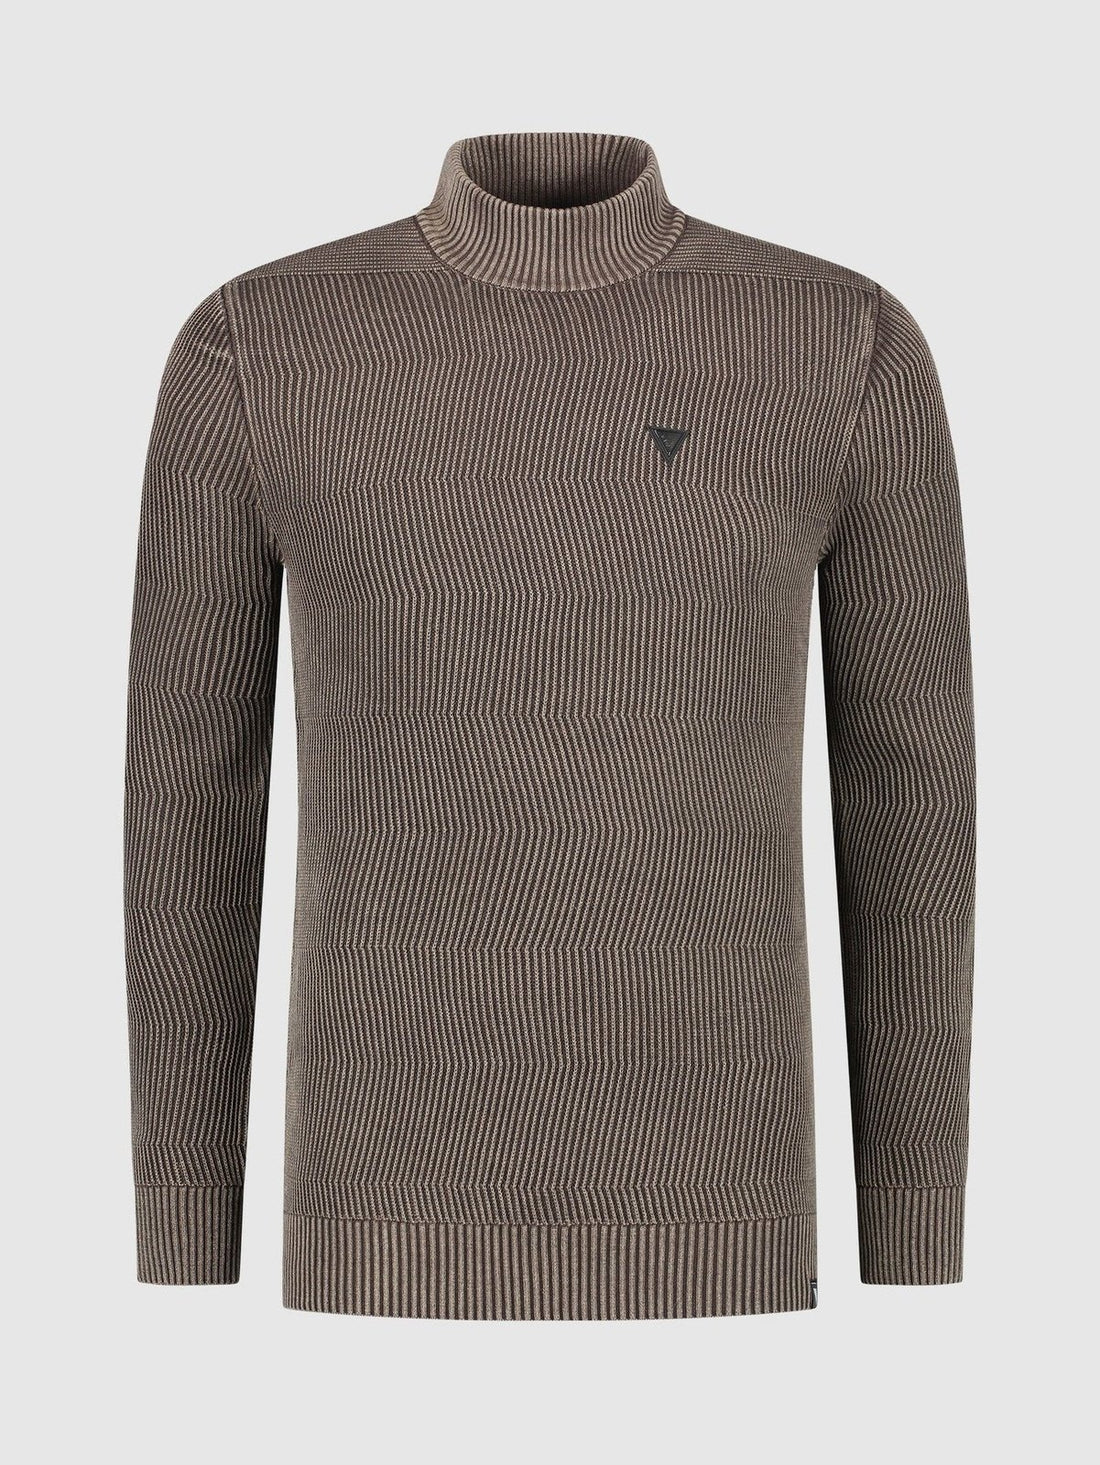 Jaquard mockneck with triangle badge on chest